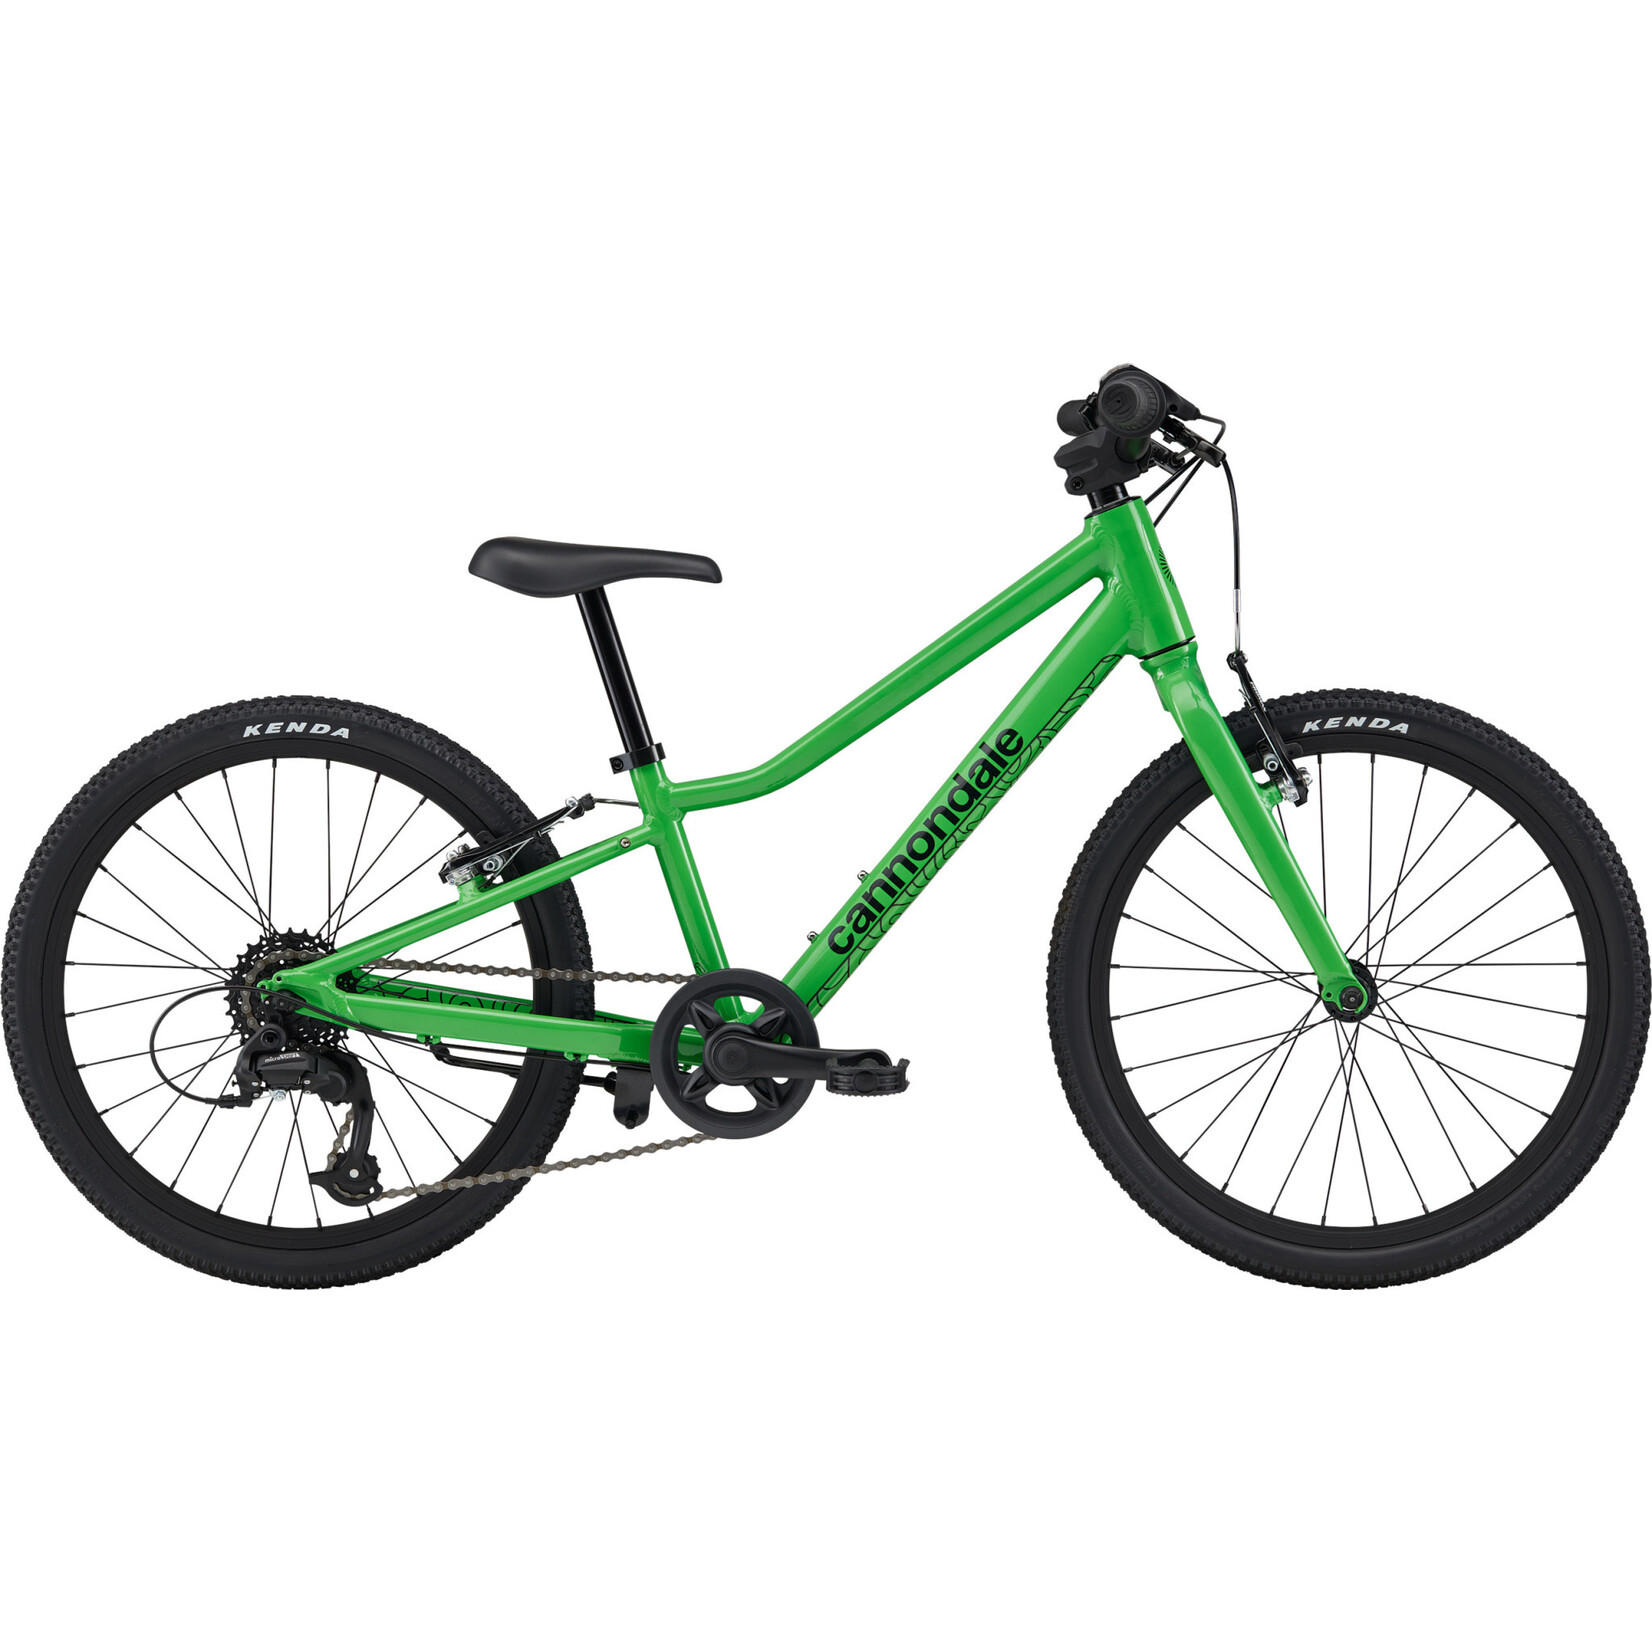 Cannondale Cannondale Kids Quick 20 GRN OS